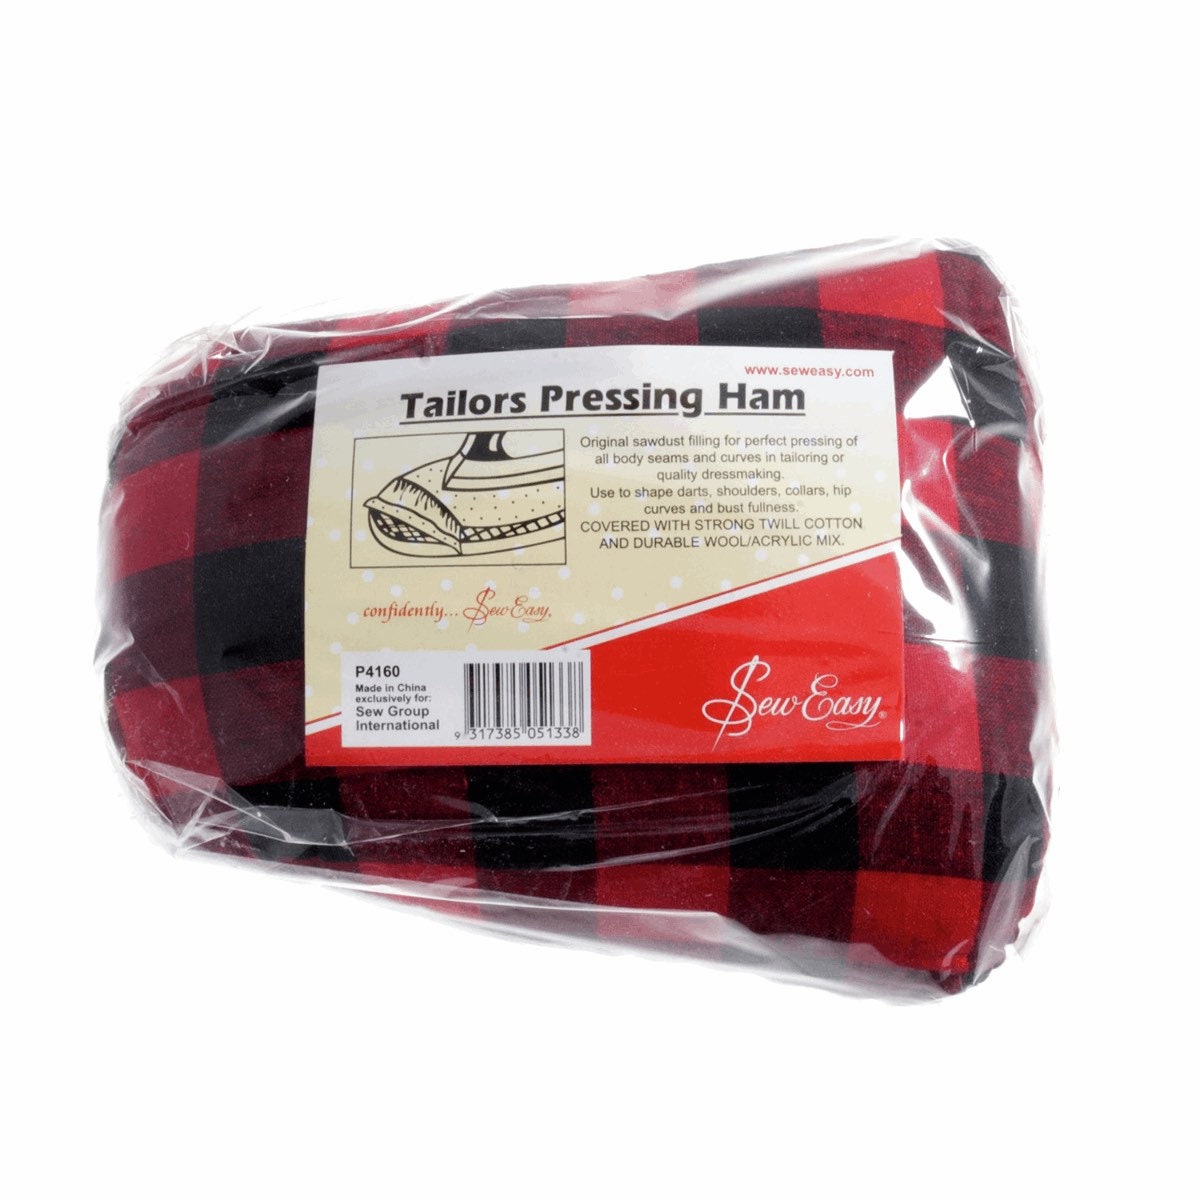 Tailors Pressing Ham Sew Easy H4160 Sawdust Filling for Perfect